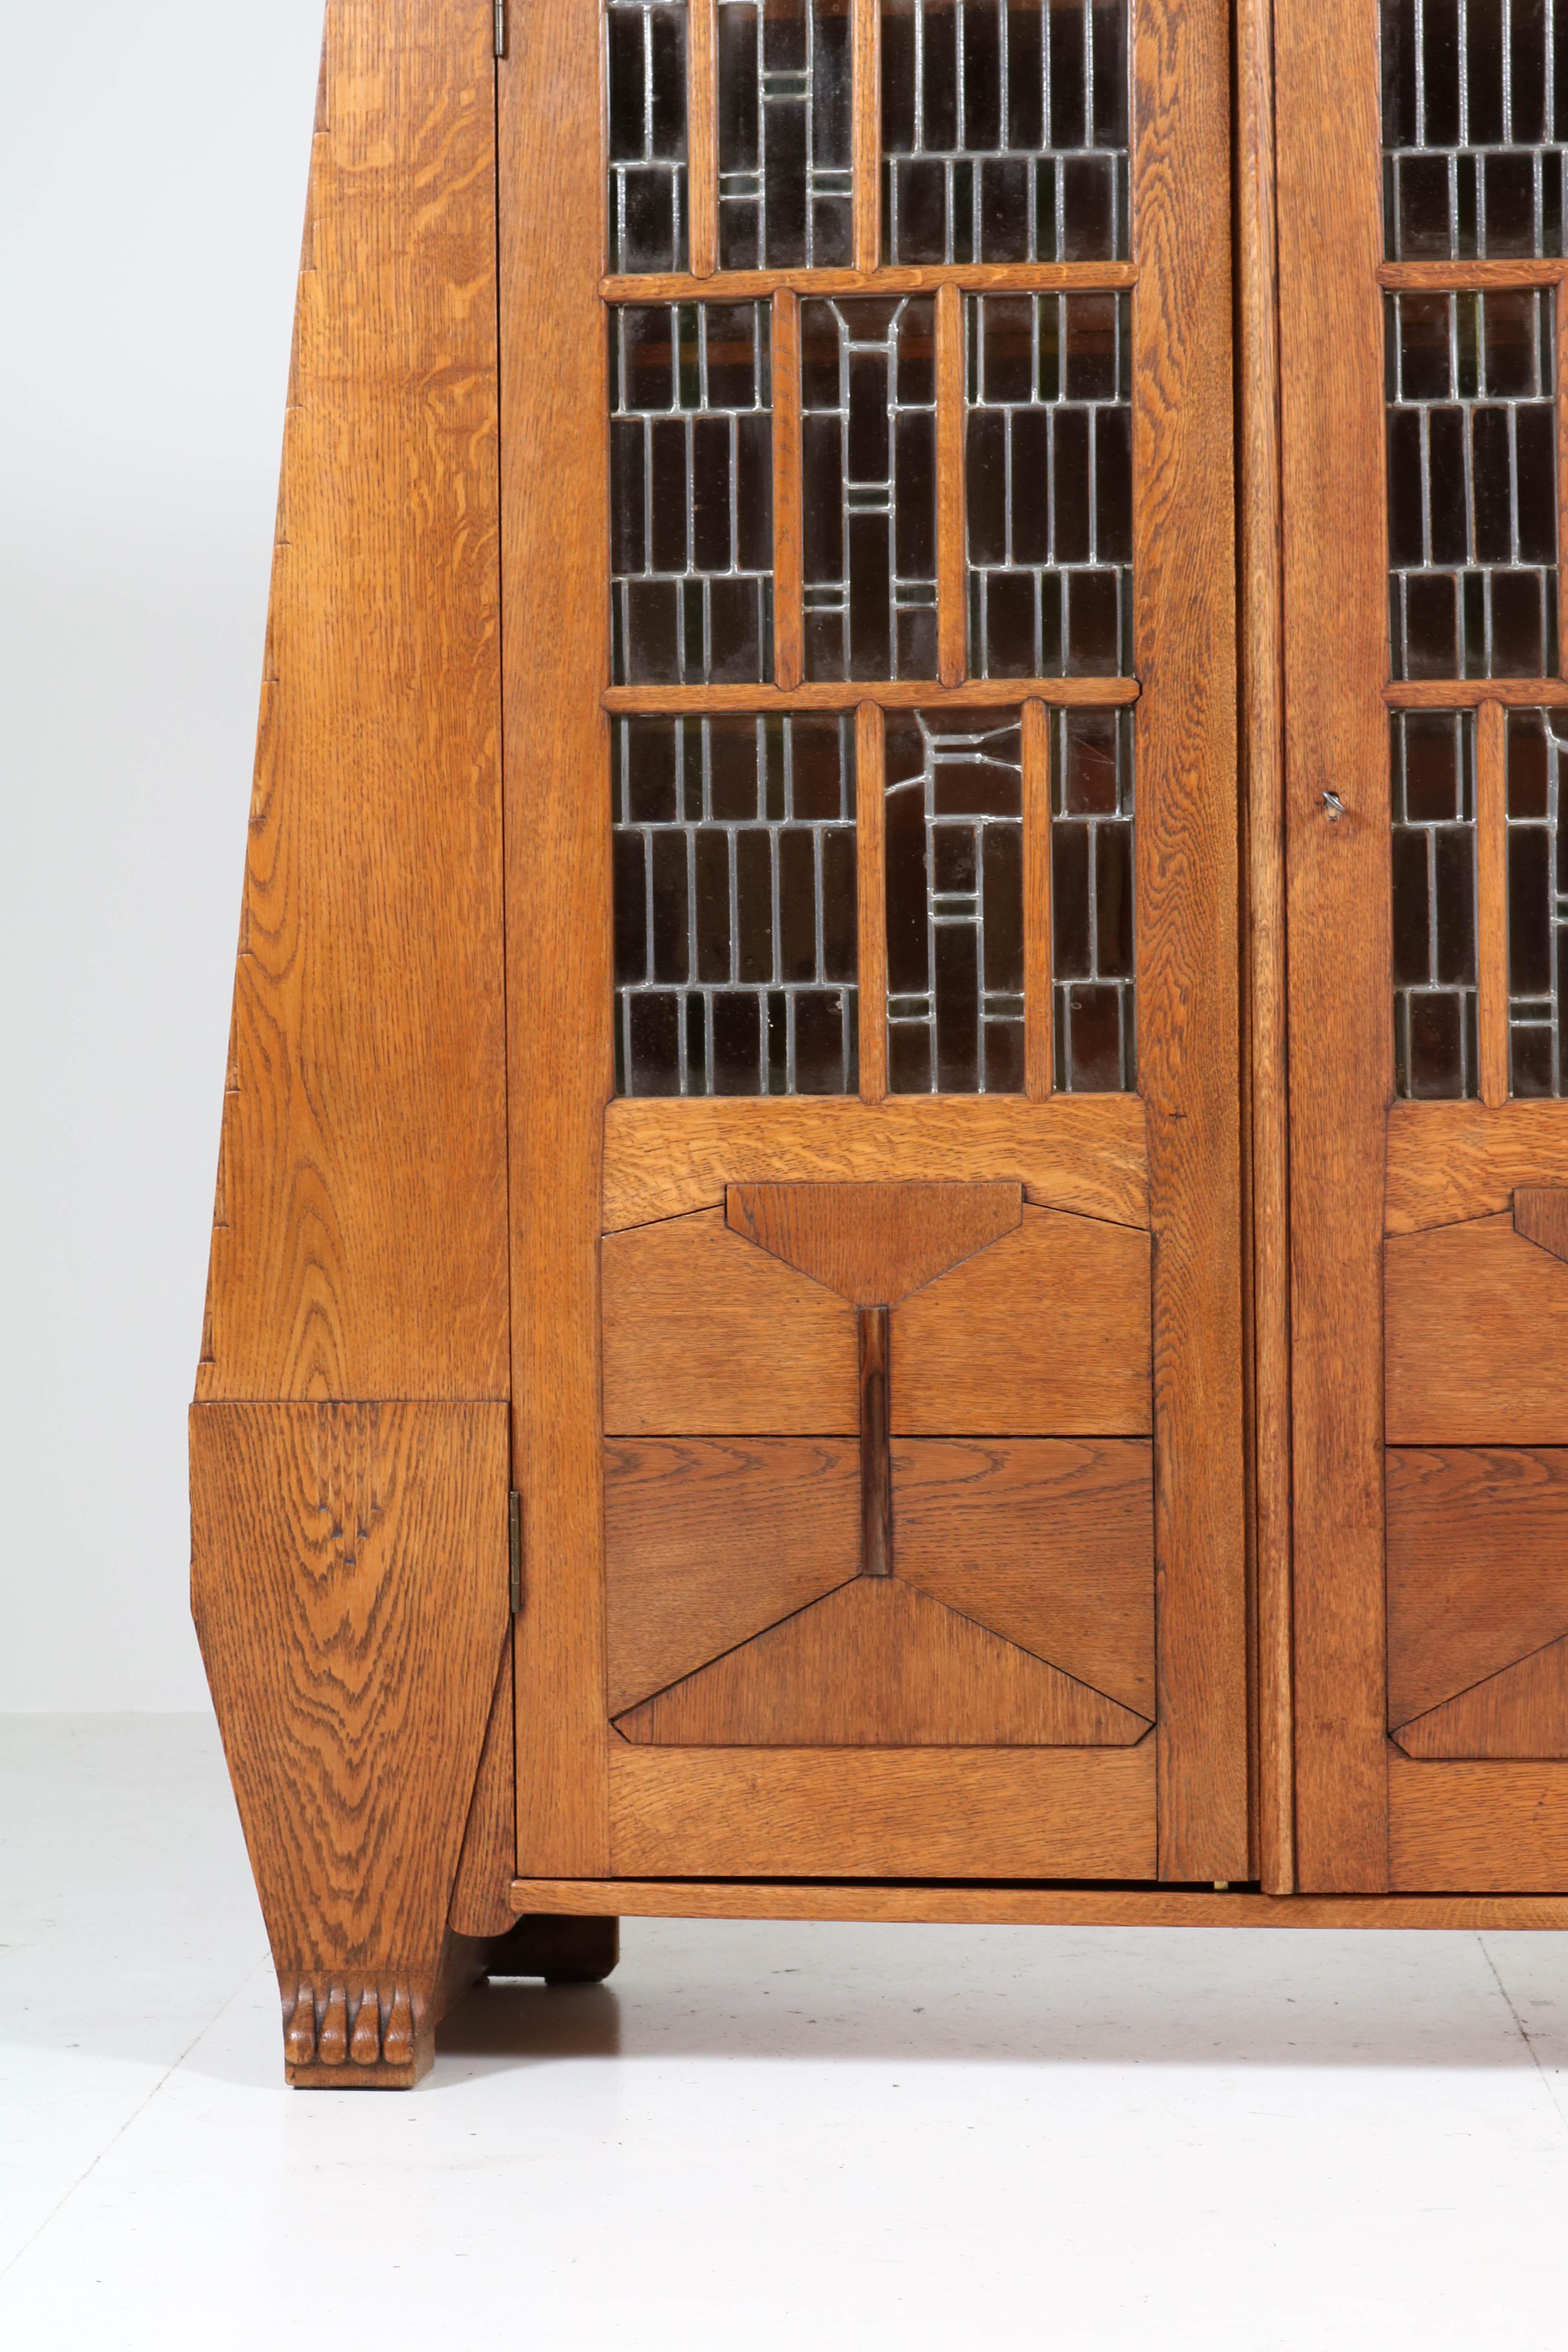 Oak Art Deco Amsterdam School Bookcase with Stained Glass by Hildo Krop, 1918 6